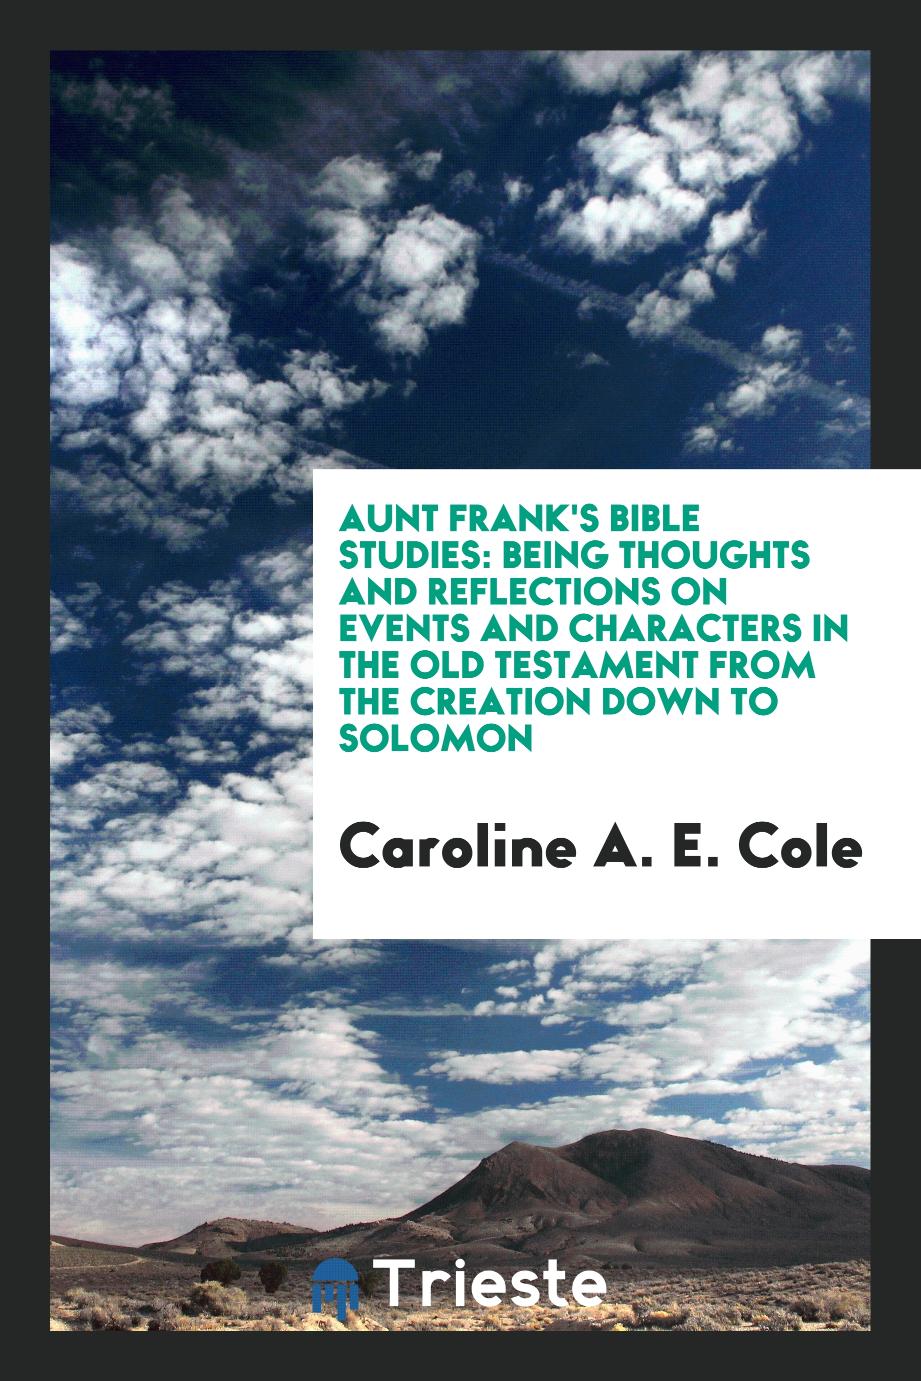 Aunt Frank's Bible Studies: Being Thoughts and Reflections on Events and Characters in the Old Testament from the Creation down to Solomon